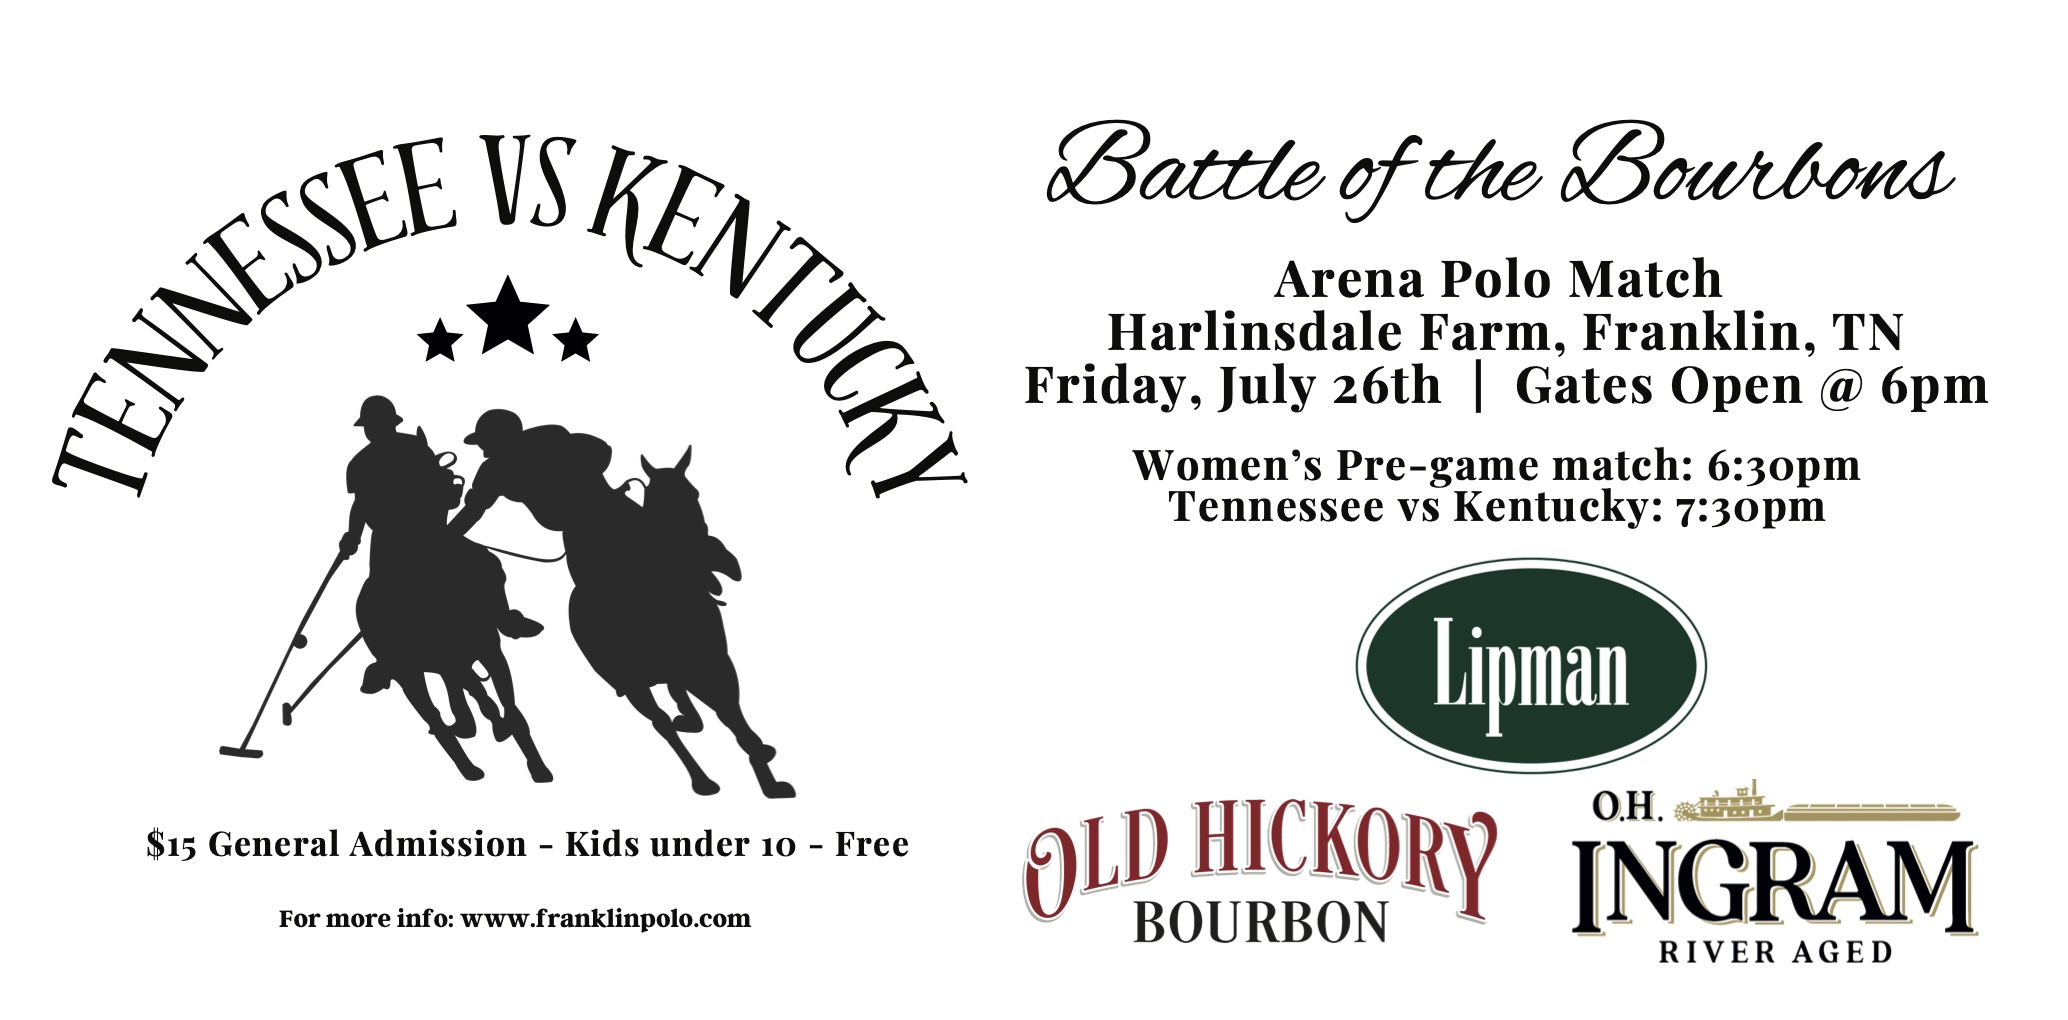 Battle of the Bourbons Arena Polo Match | Tennessee vs Kentucky